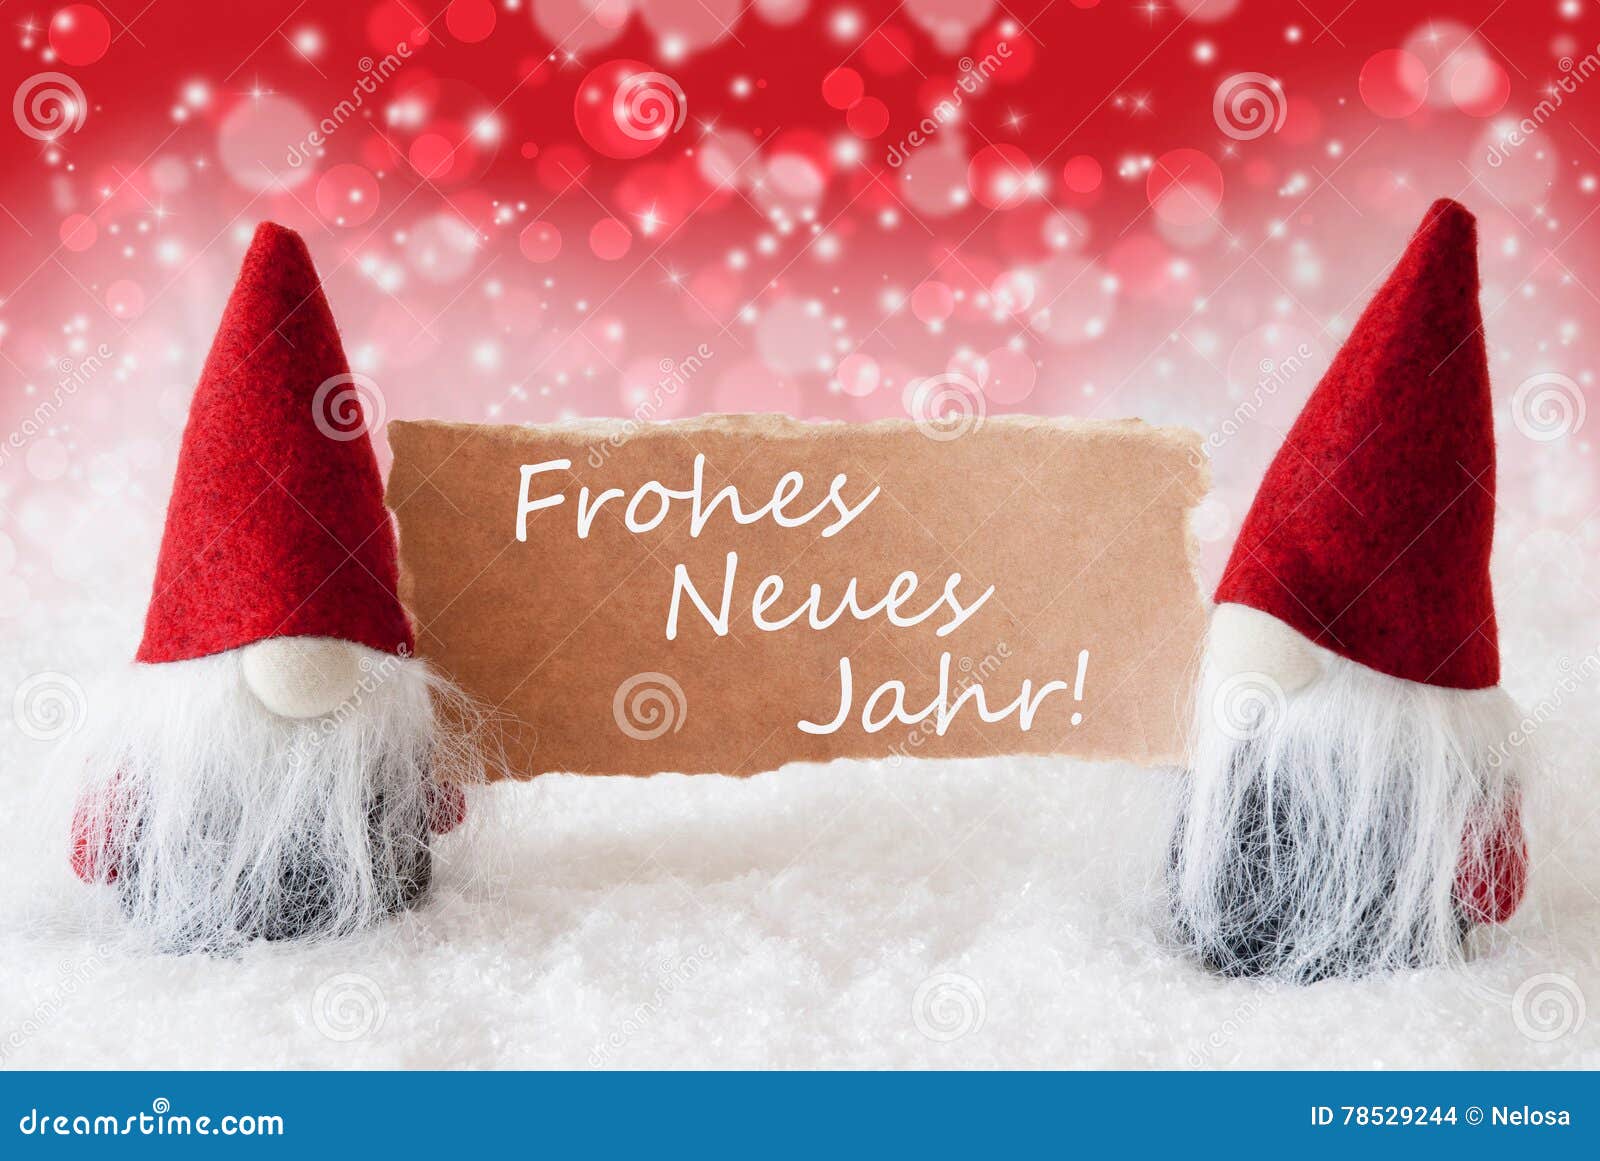 red christmassy gnomes with card, neues jahr means new year